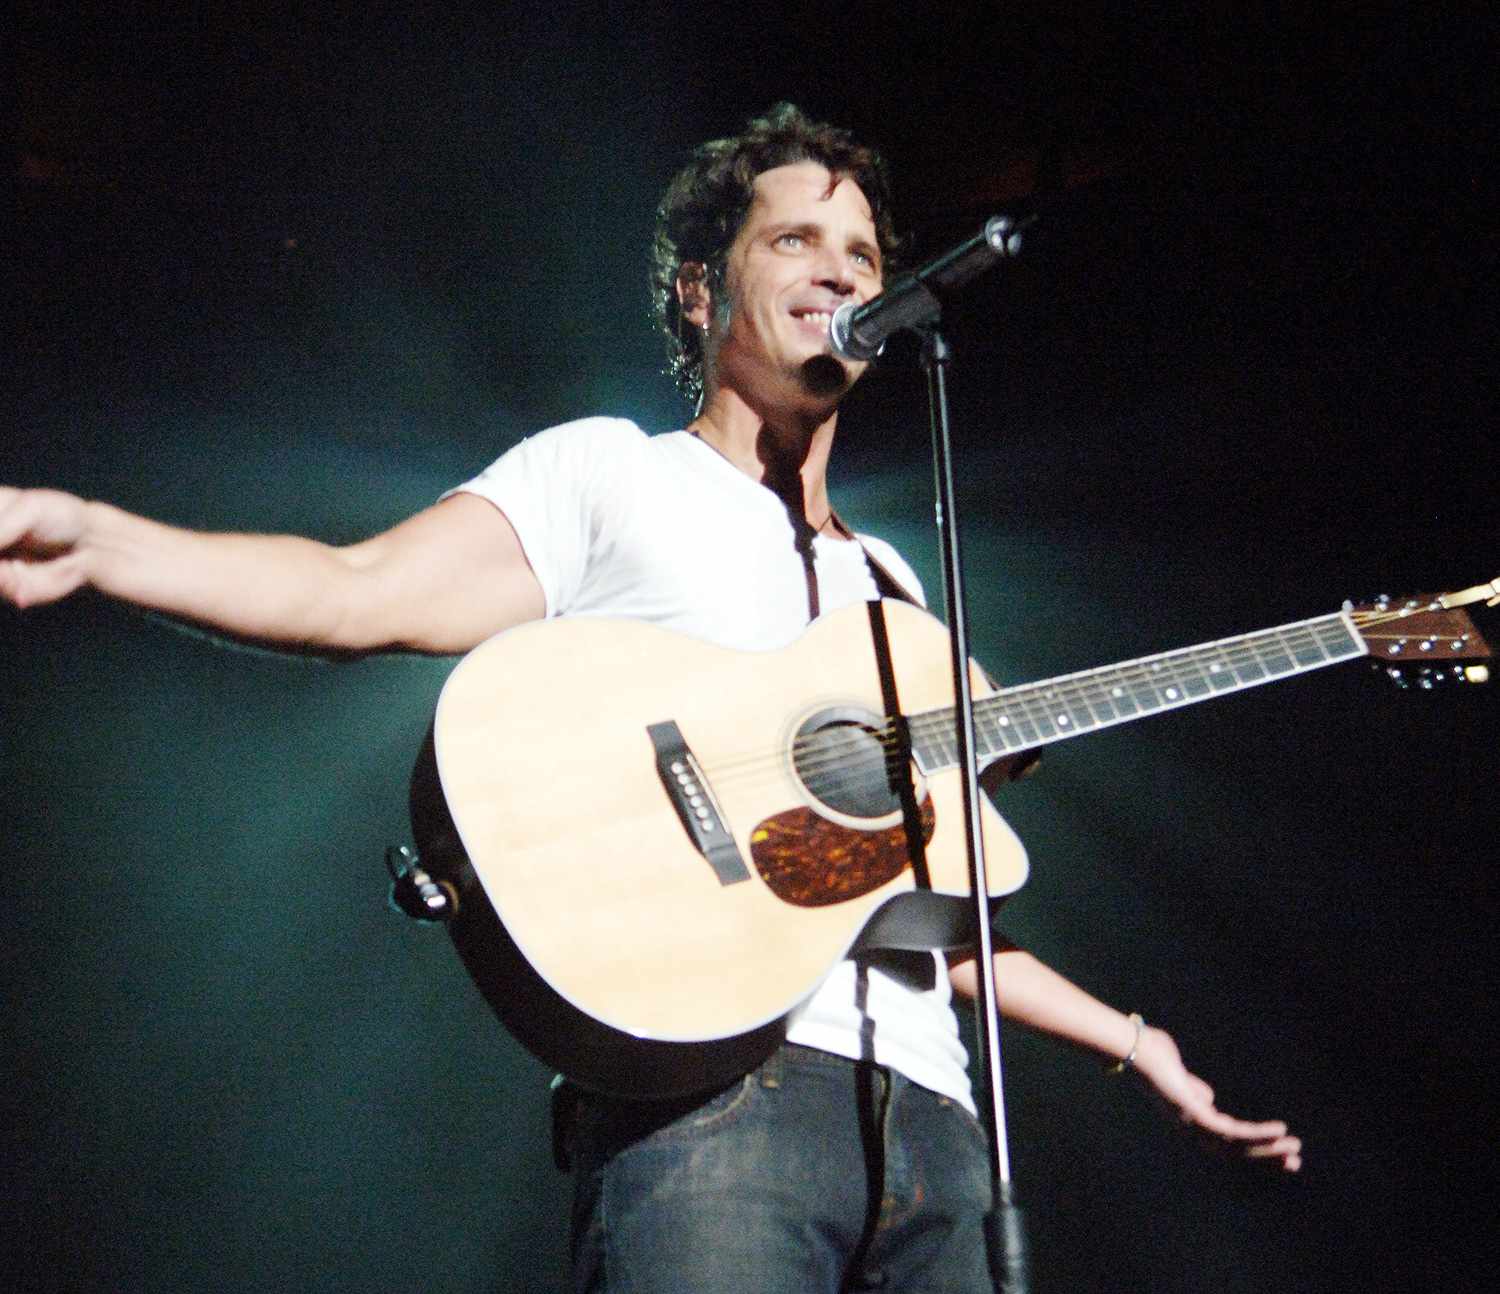 Audioslave in Concert at Madison Square Garden in New York City - October 29, 2005